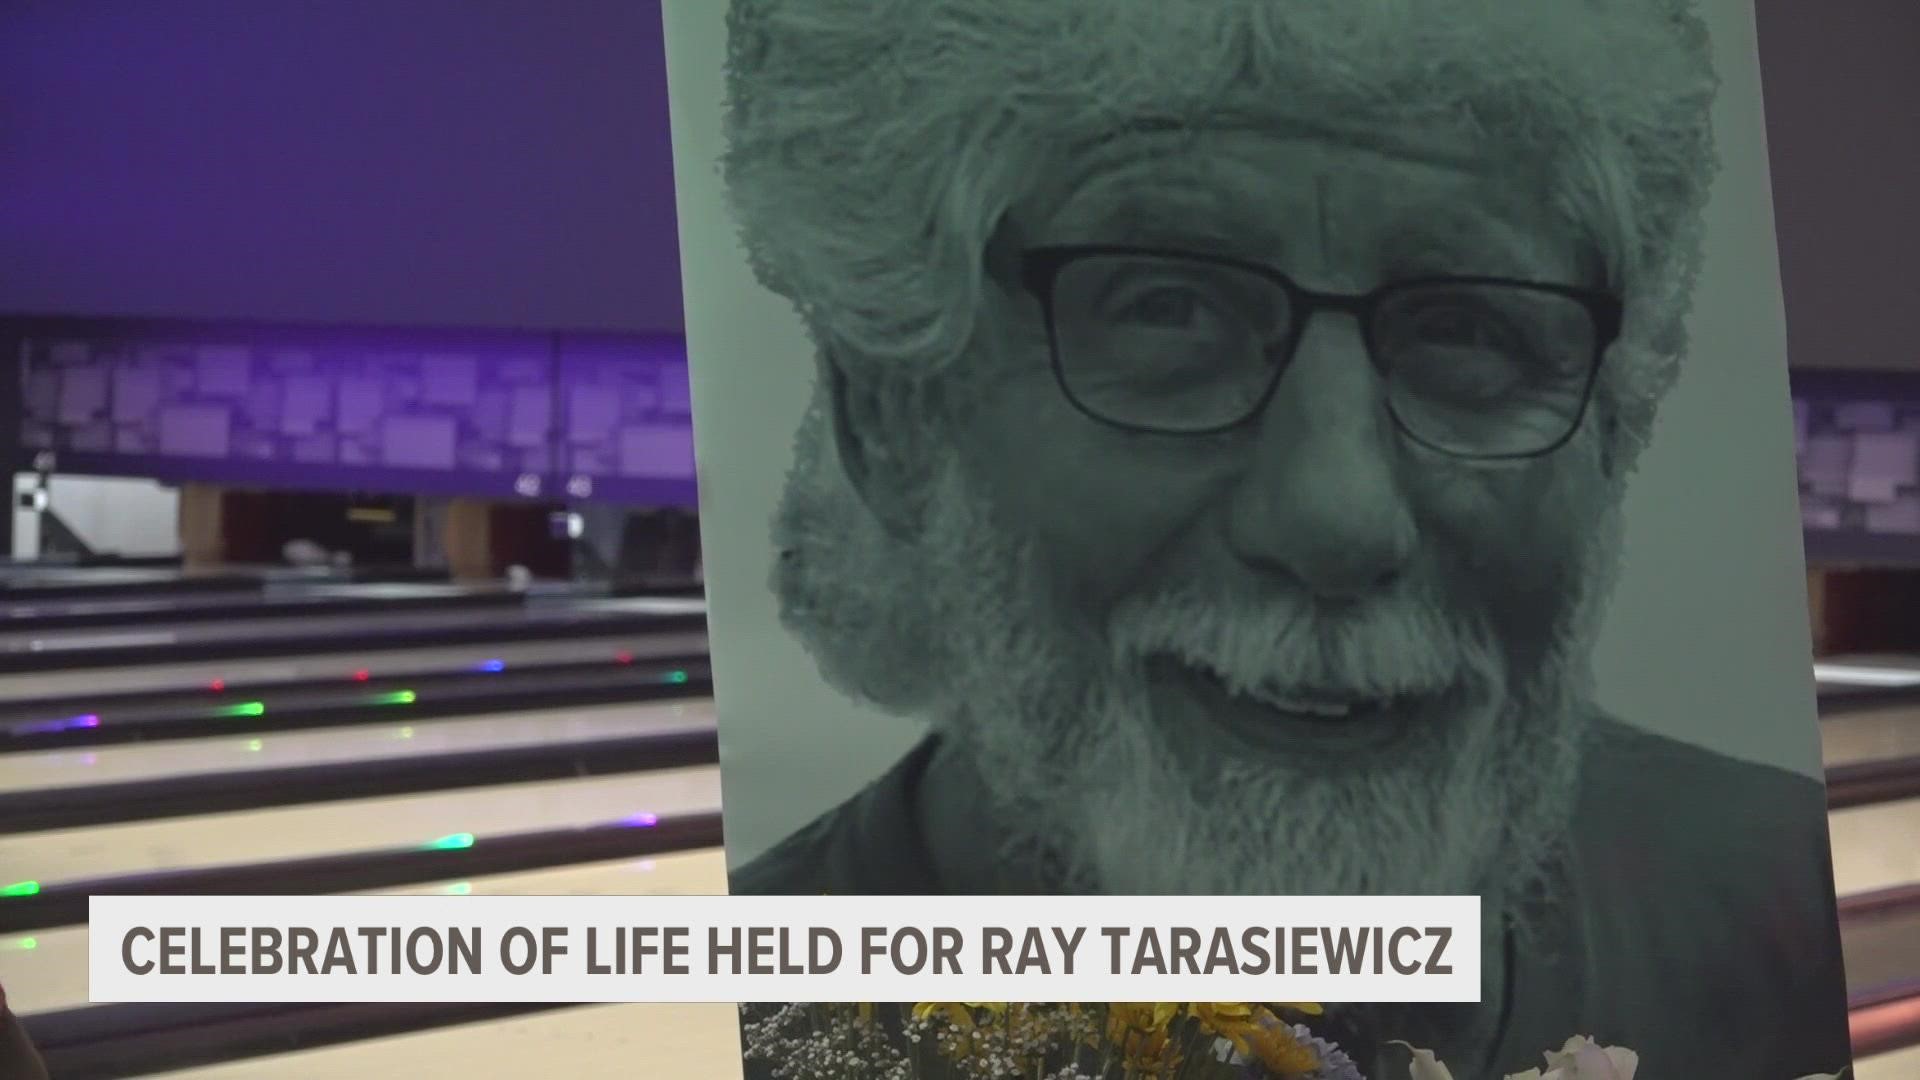 The event was held at Spectrum Entertainment Complex in Wyoming, a bowling alley close to Tarasiewicz's heart.